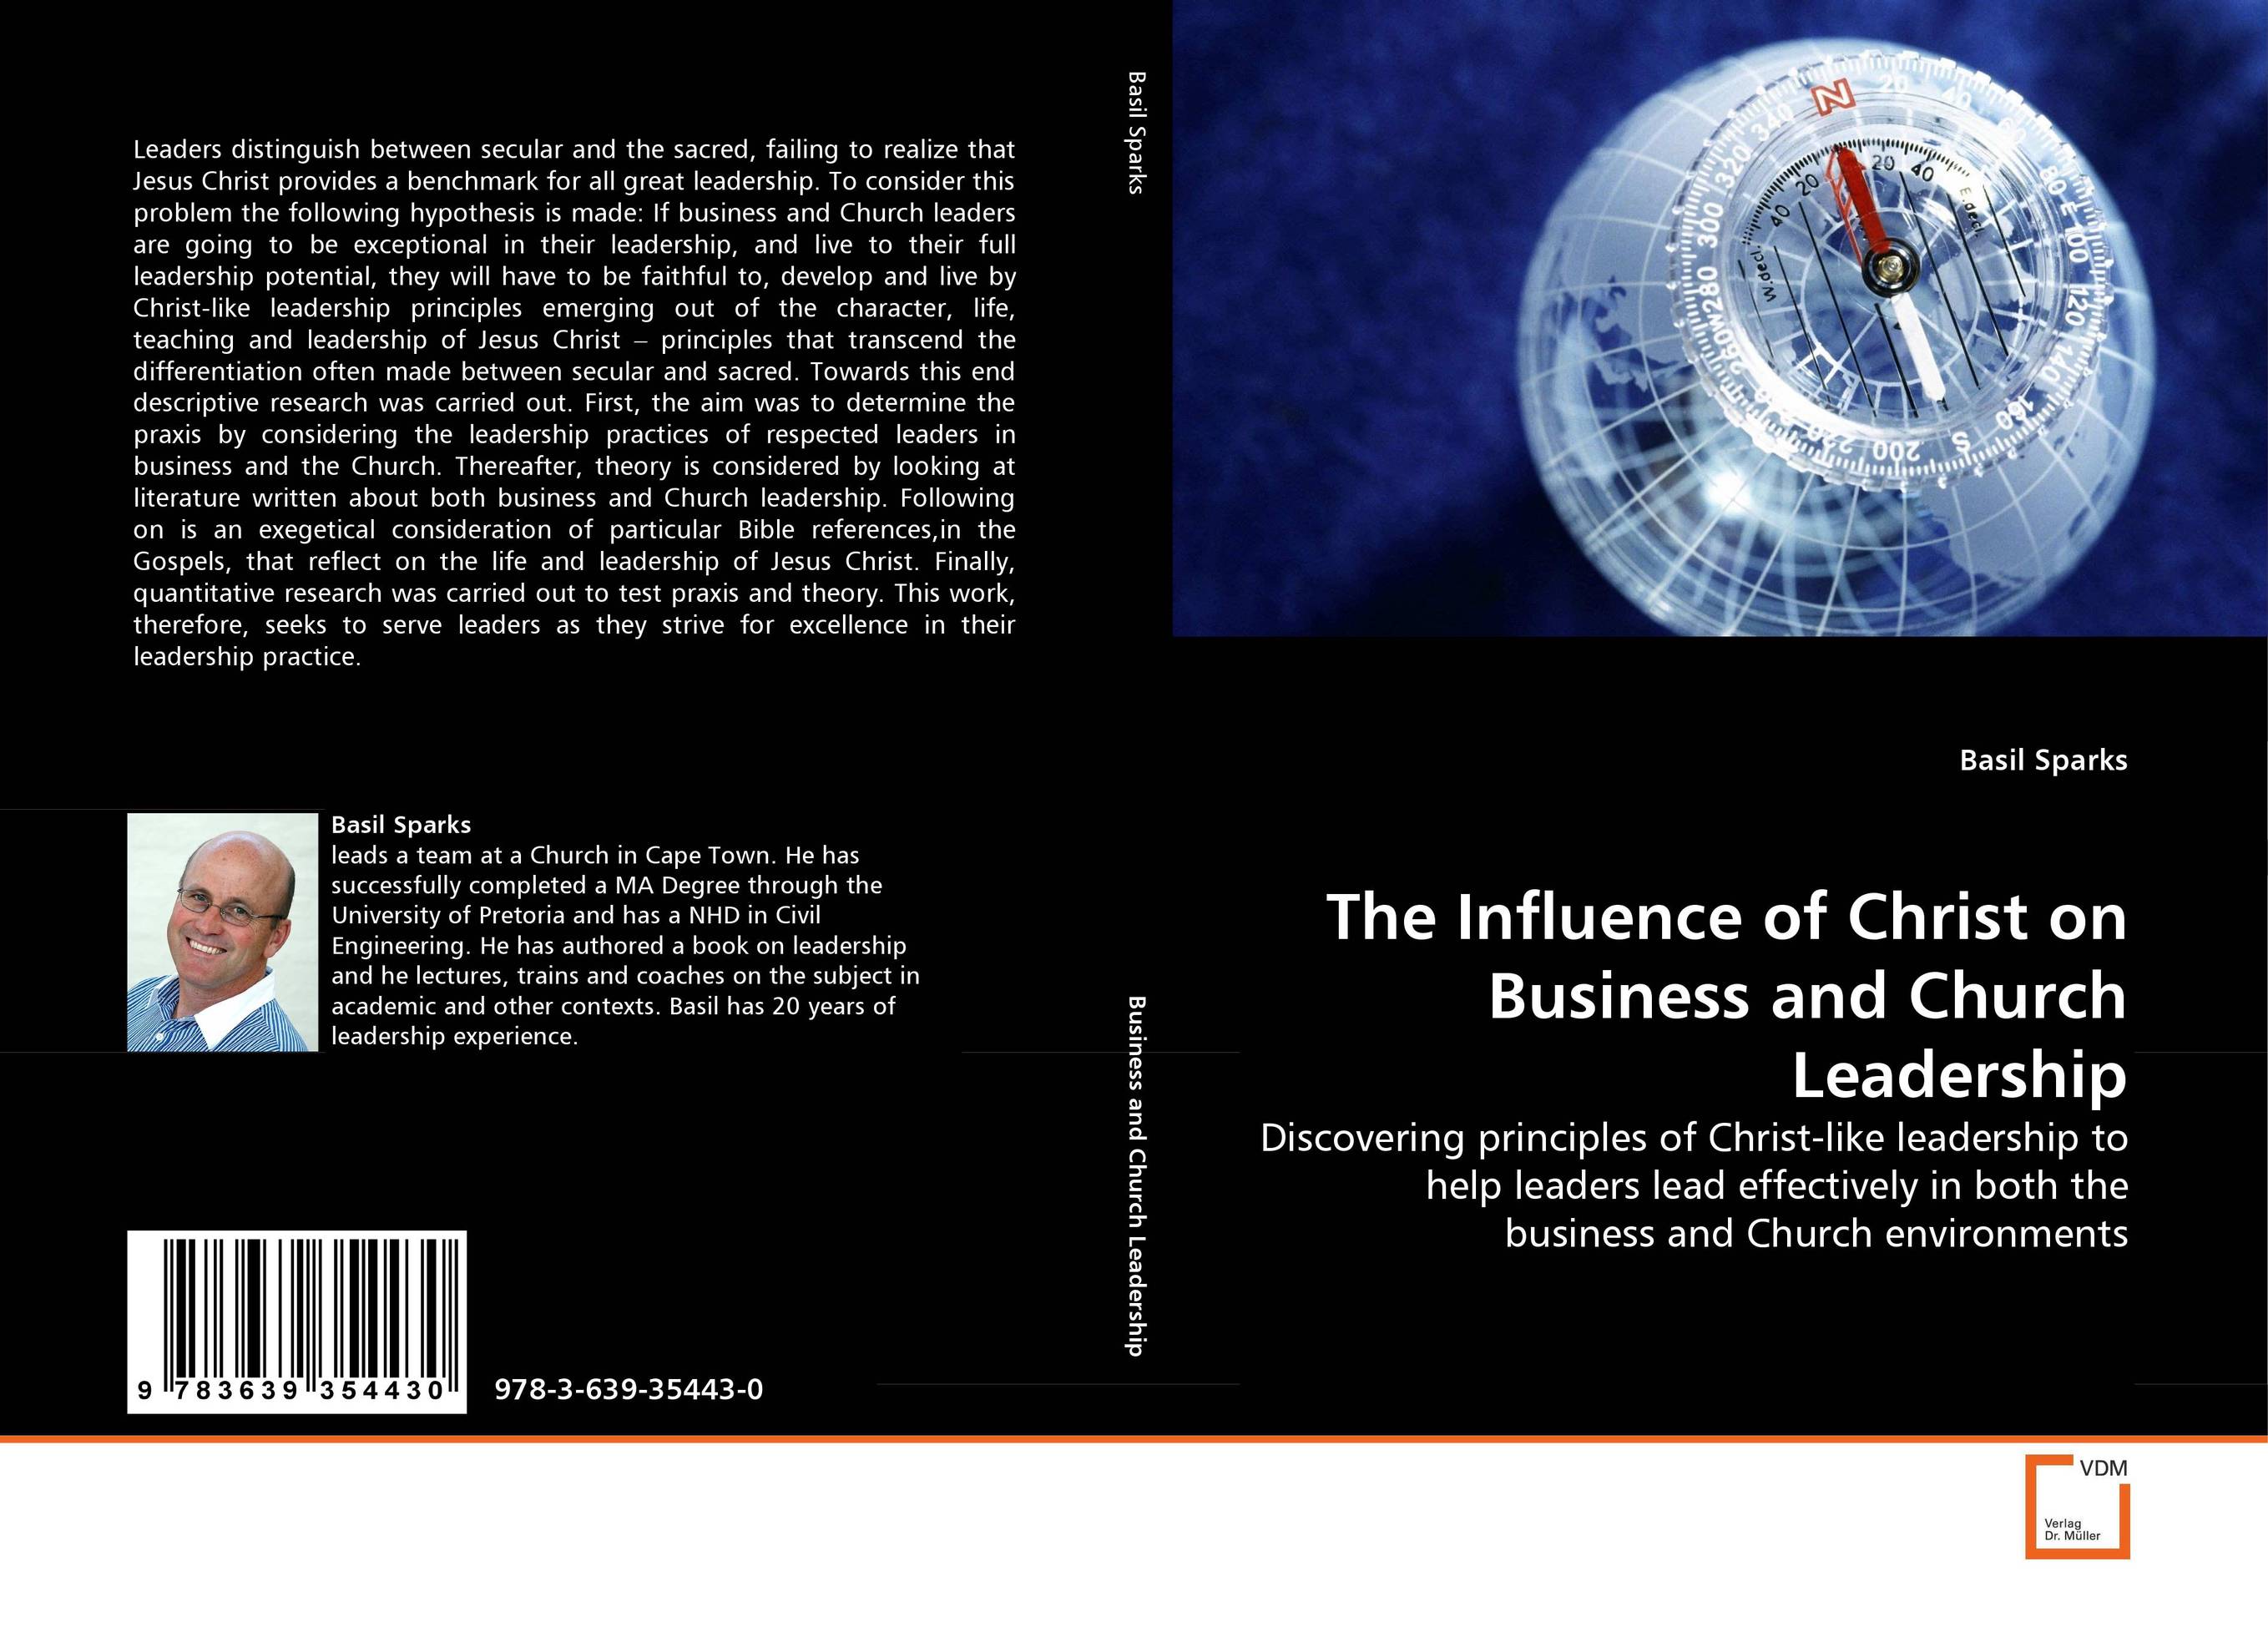 The Influence of Christ on Business and Church Leadership